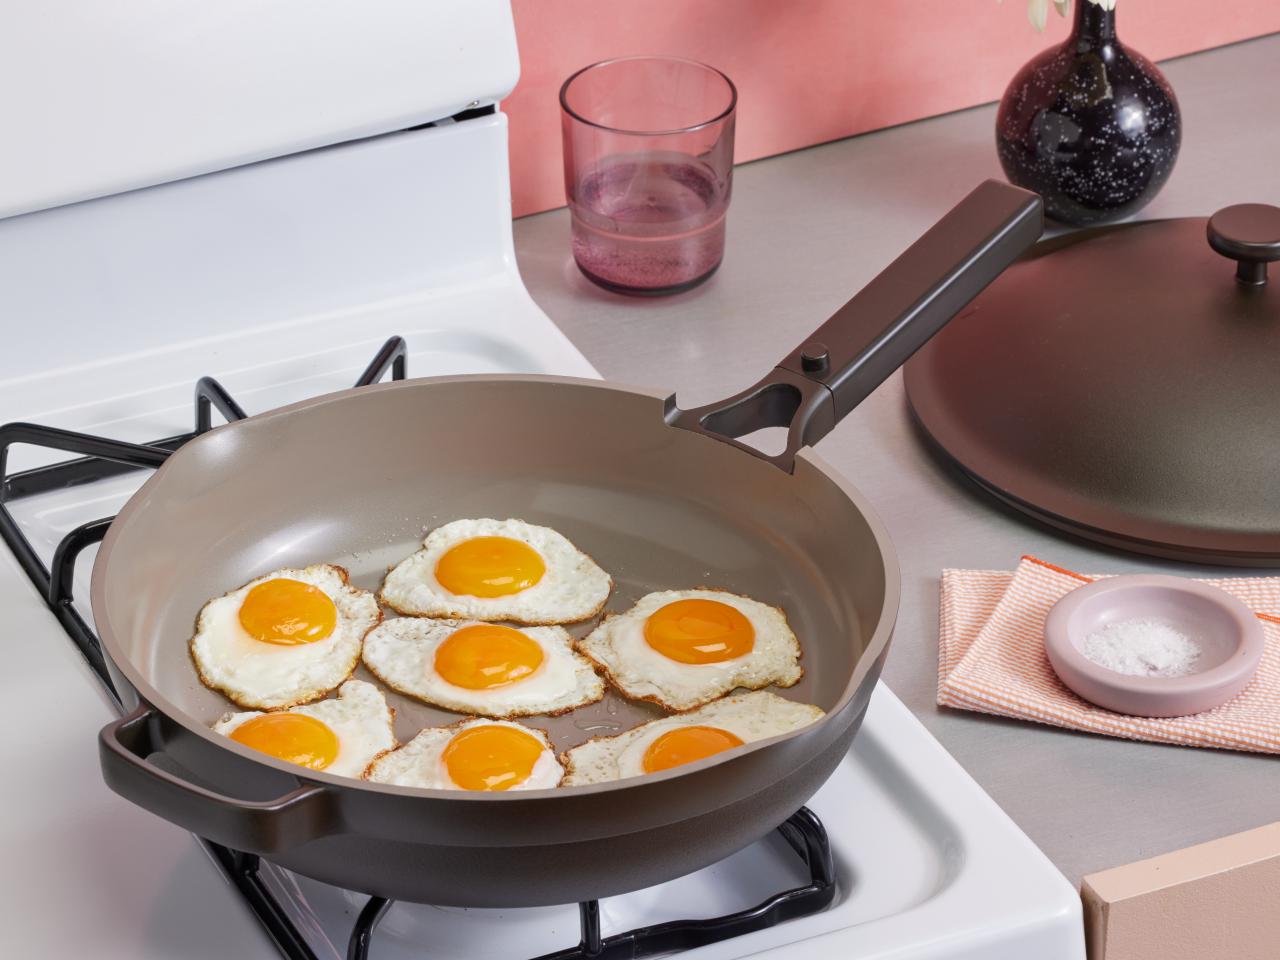 Our Place Always Pan Cookware Review - Consumer Reports